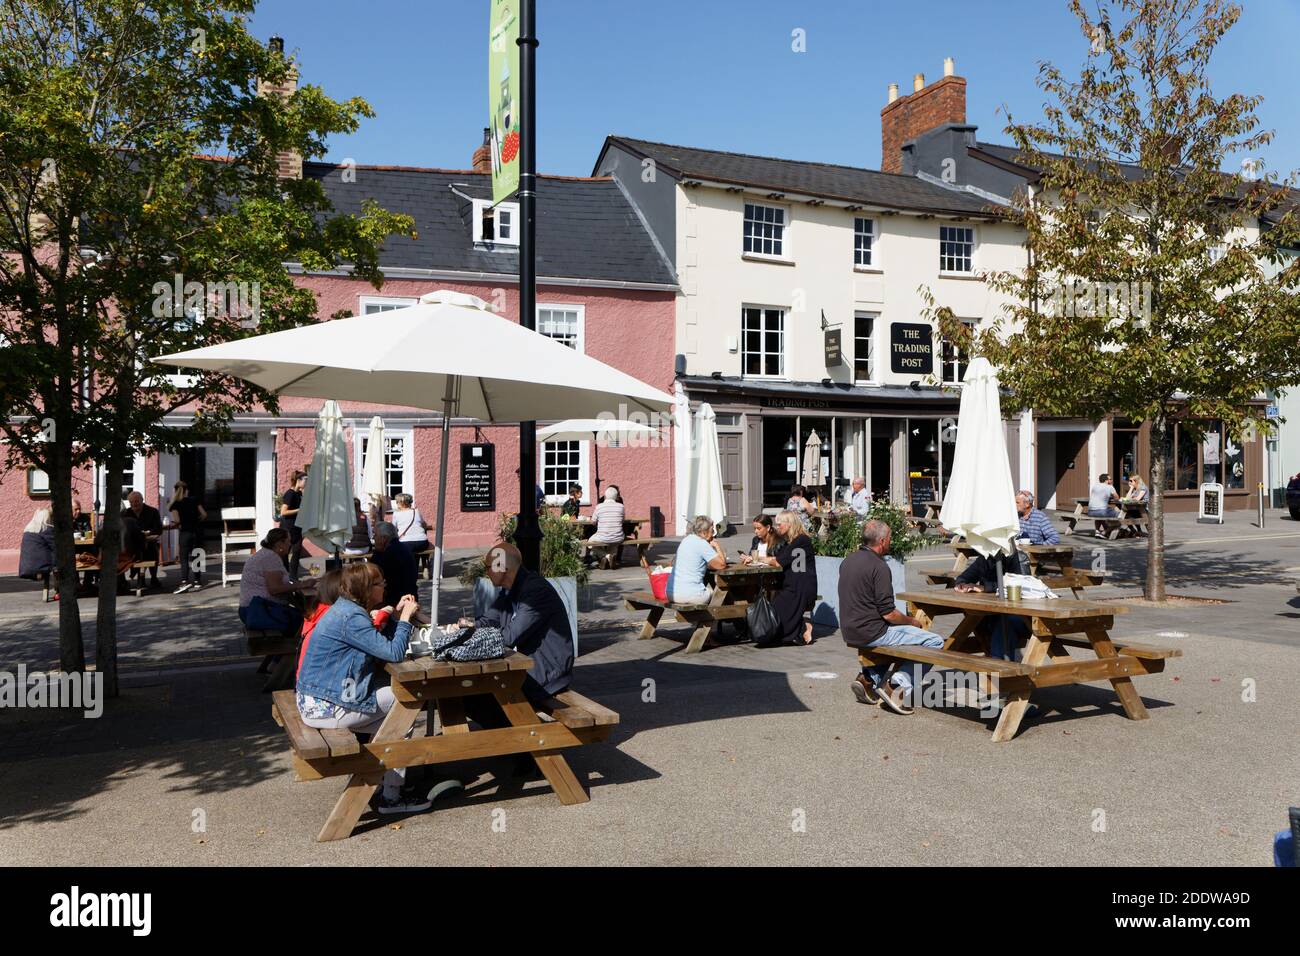 People sitting at tables at public house outdoors during pandemic, Abergavenny, Wales, UK Stock Photo